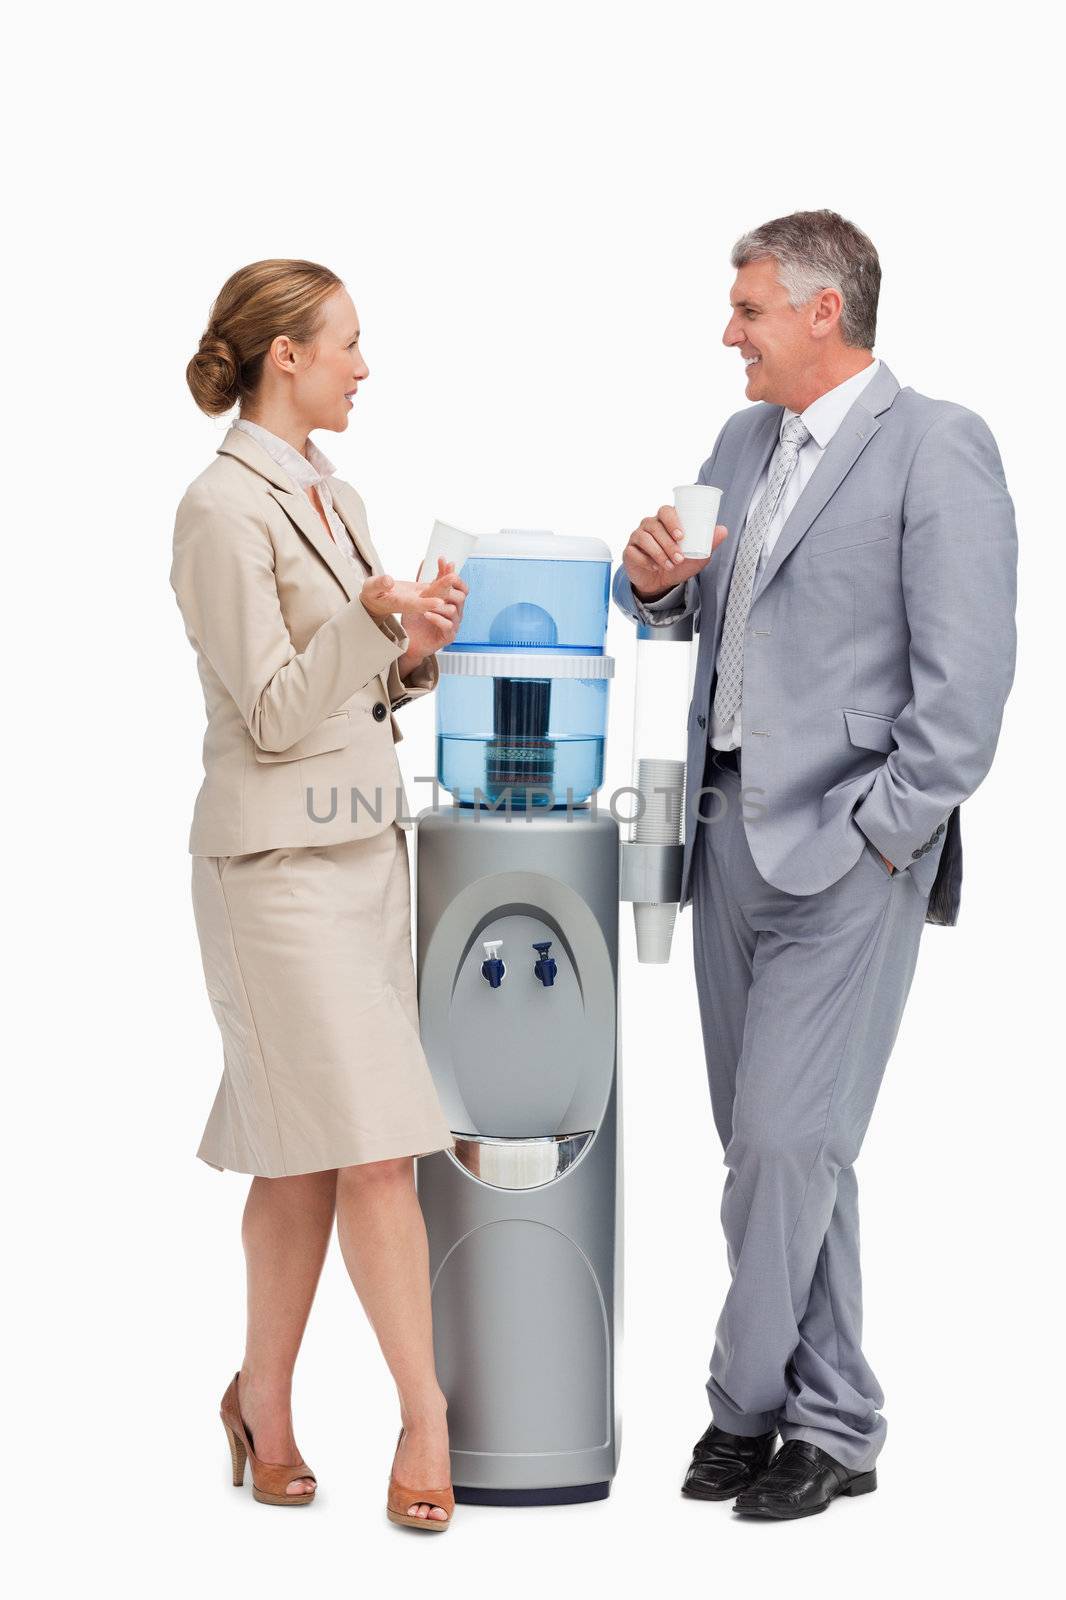 Business people talking next to the water dispenser  against white background